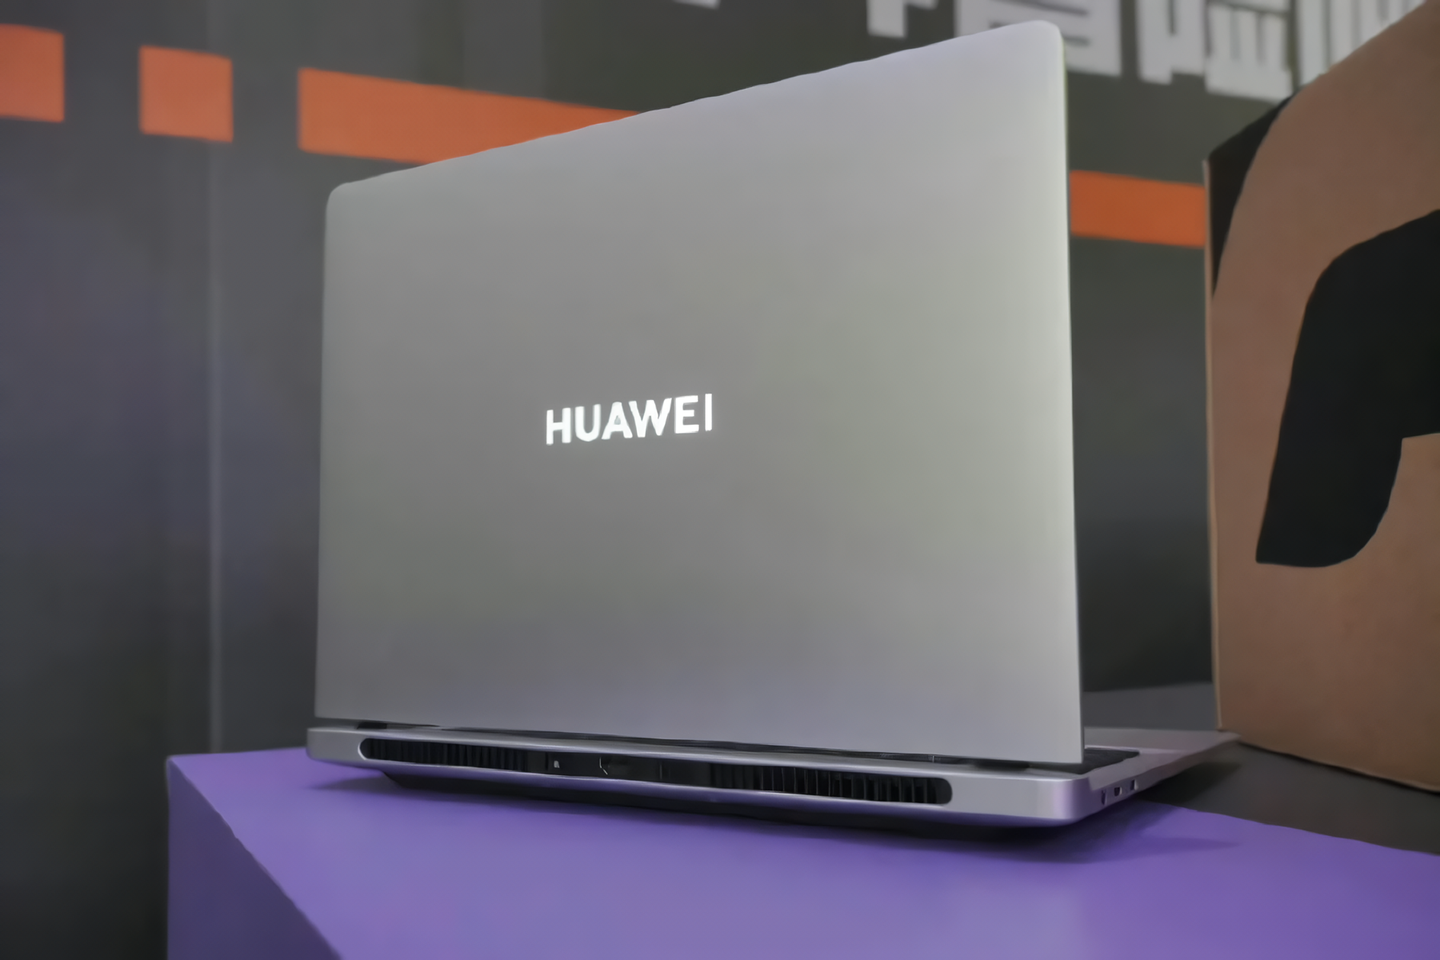 Huawei's first gaming laptop has emerged in a photo